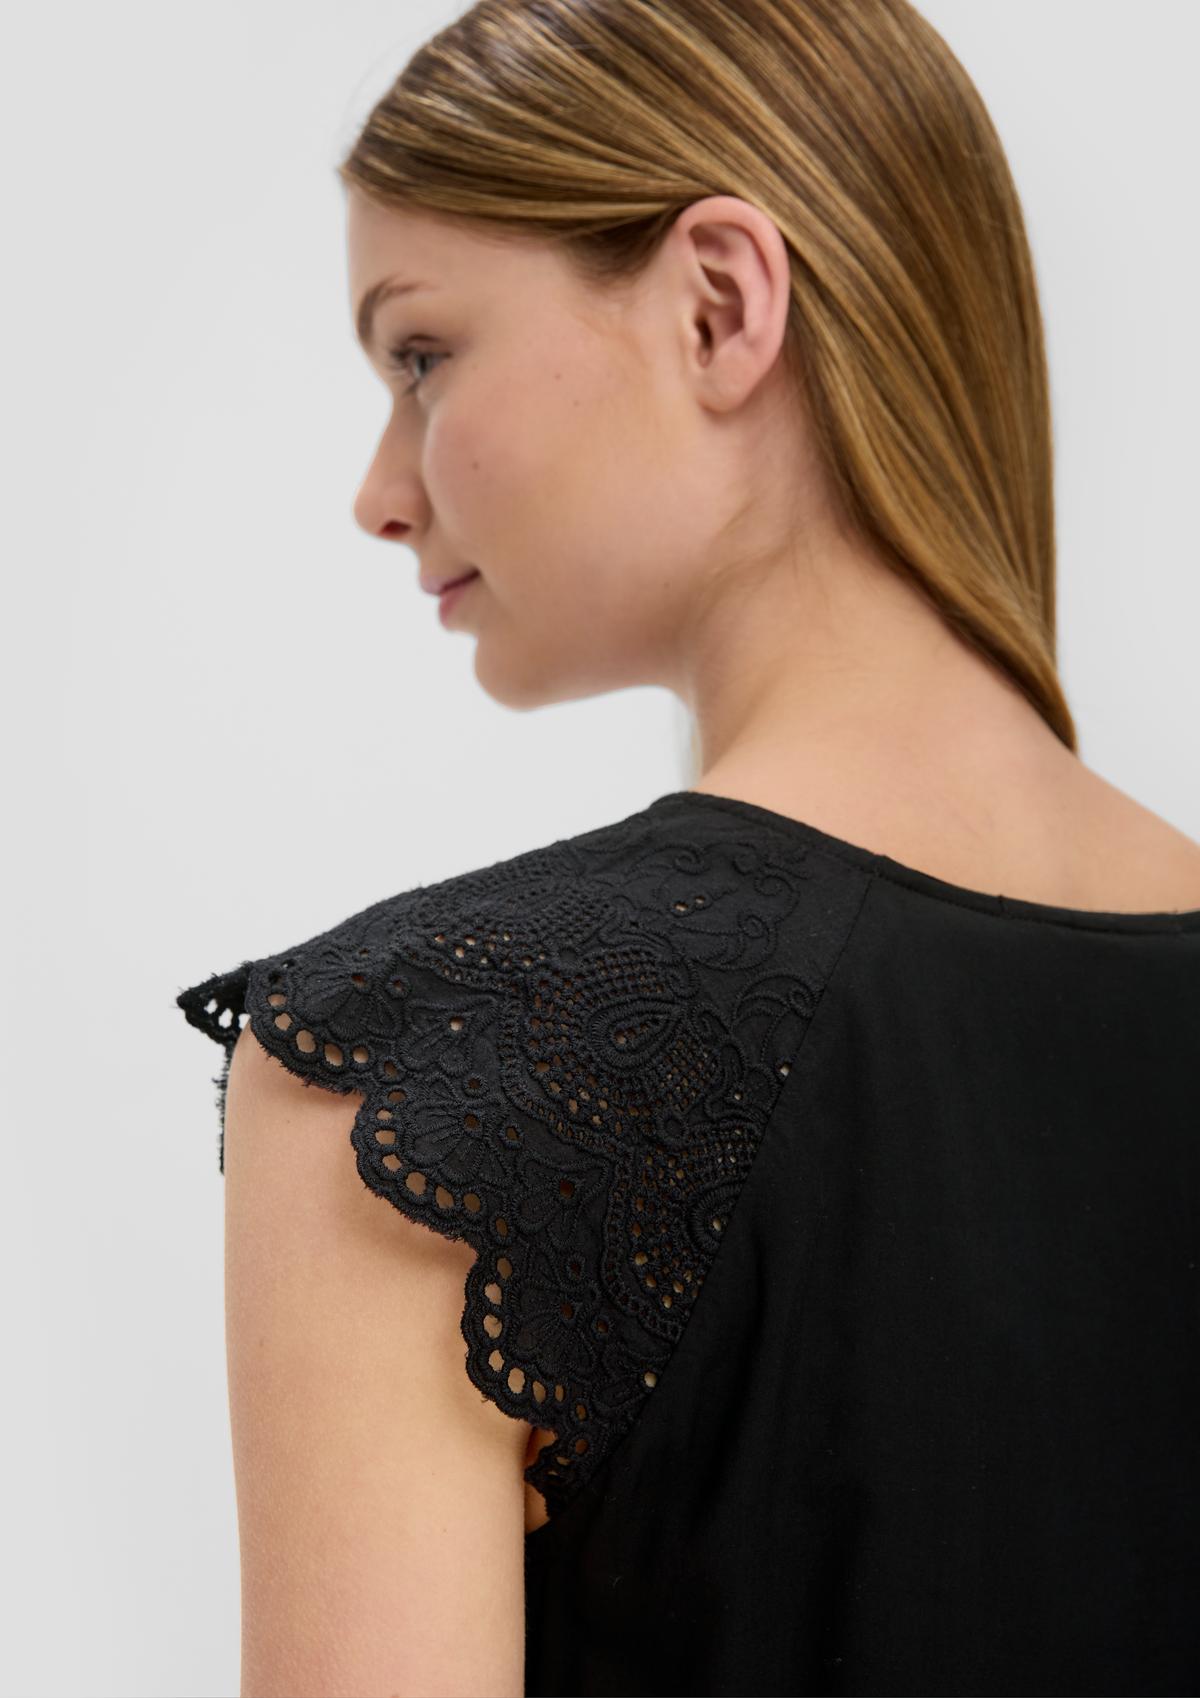 s.Oliver Blouse top with broderie anglaise